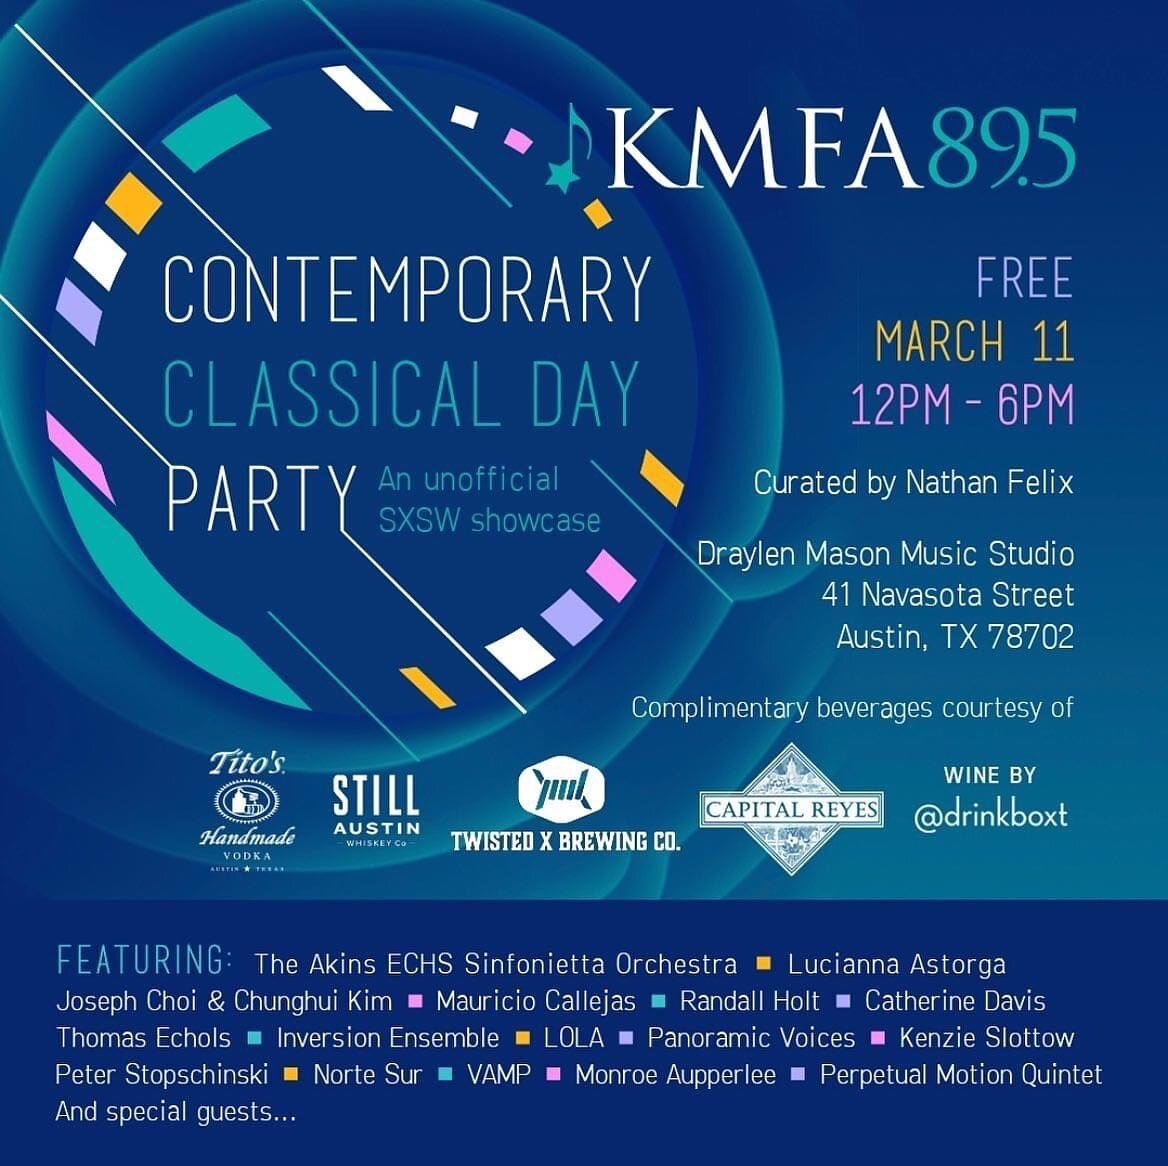 Today&rsquo;s gonna be a good one; come hang out at @kmfaclassical for a whole day of new music! I&lsquo;ll be there with @southwesternu students Monroe Aupperlee and Luke Marx; Luke and I are giving the workshop premiere of Monroe&rsquo;s new percus